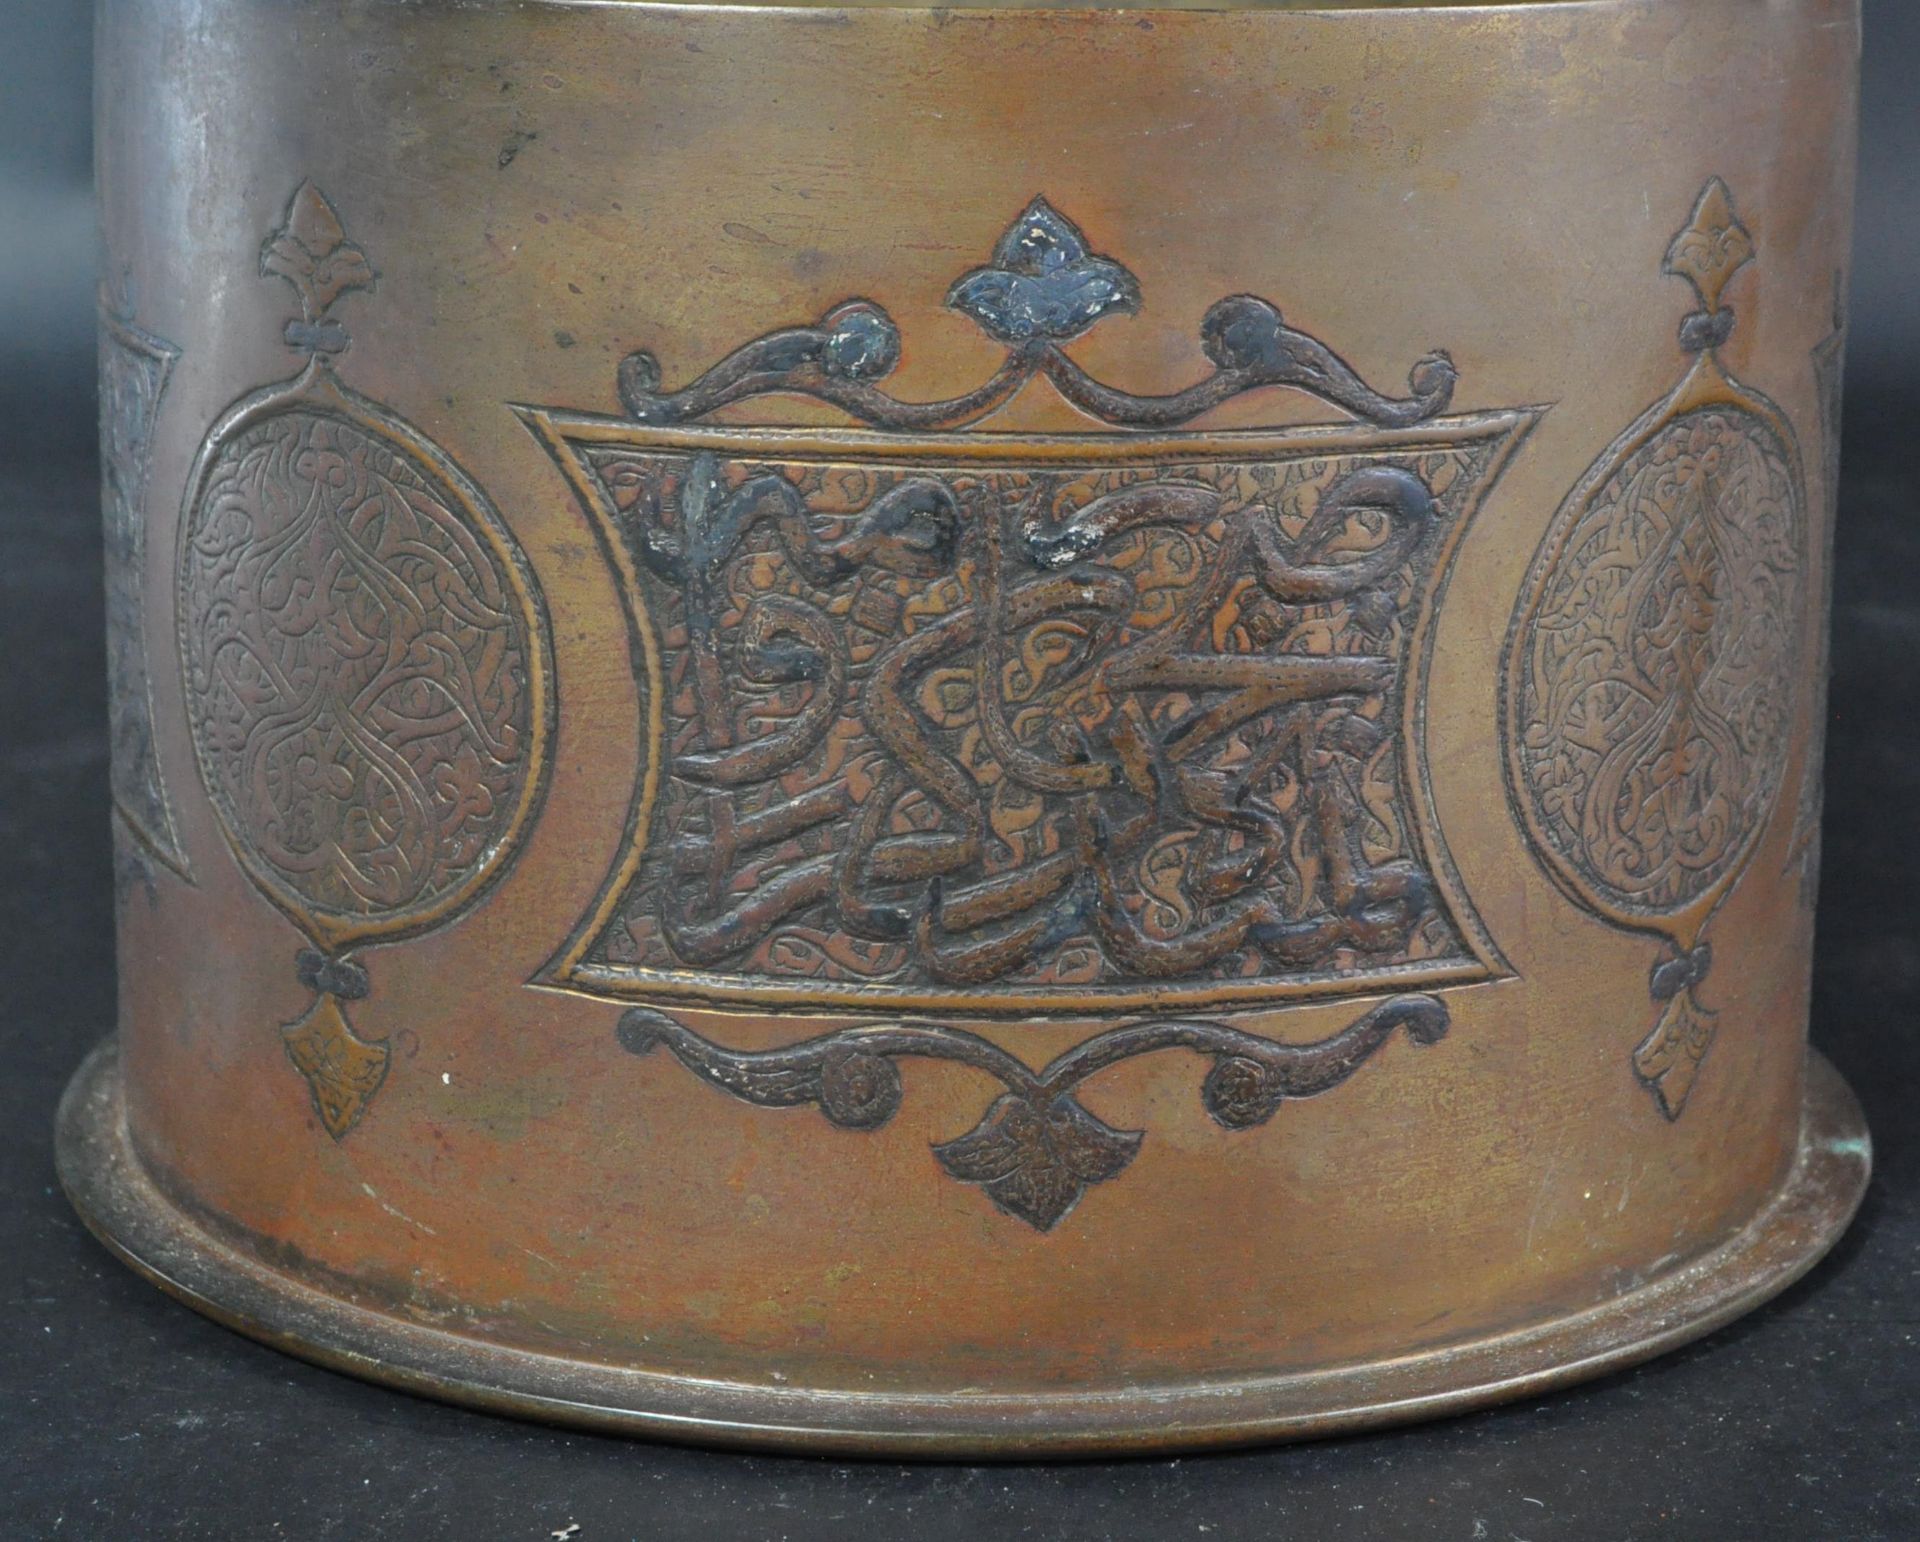 WWI FIRST WORLD WAR 1917 DATED ENGRAVED TRENCH ART ASHTRAY - Image 2 of 7